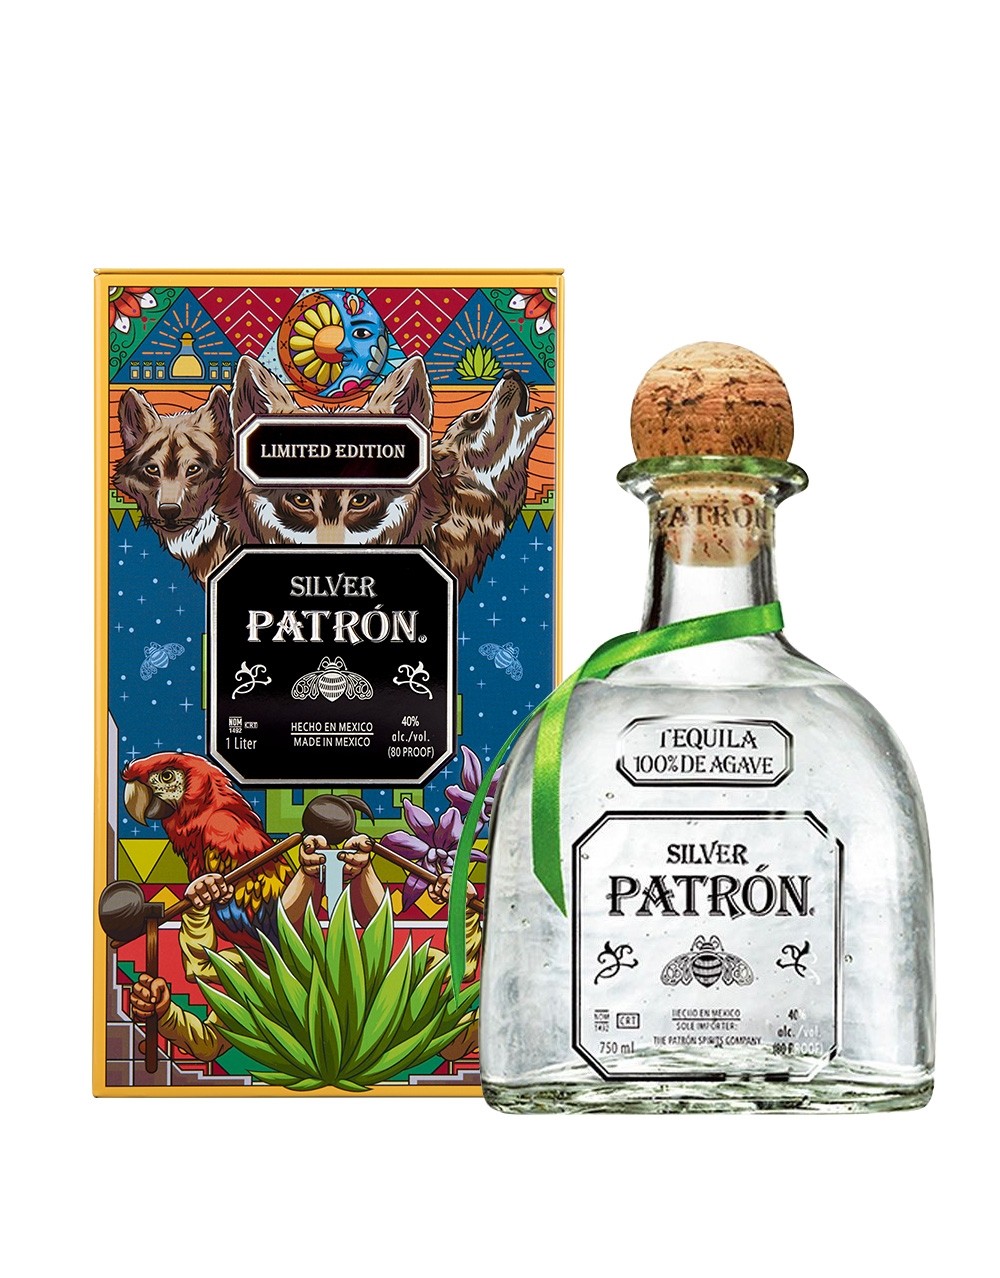 Patron Limited Edition 2018 Mexican Heritage Tin Buy